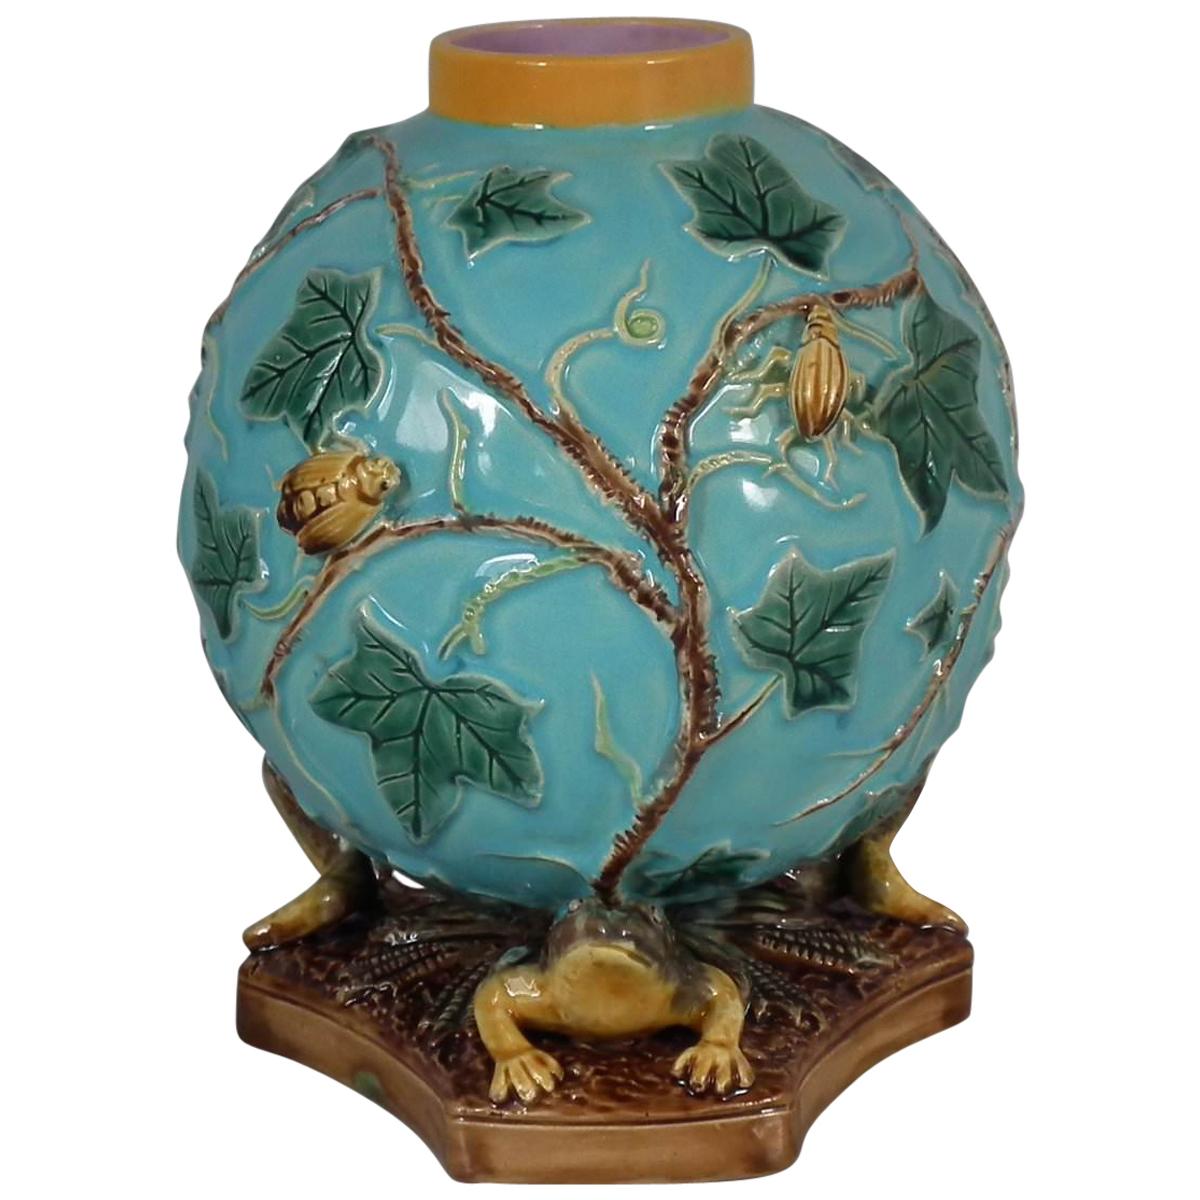 George Jones Majolica Frog and Insect Vase